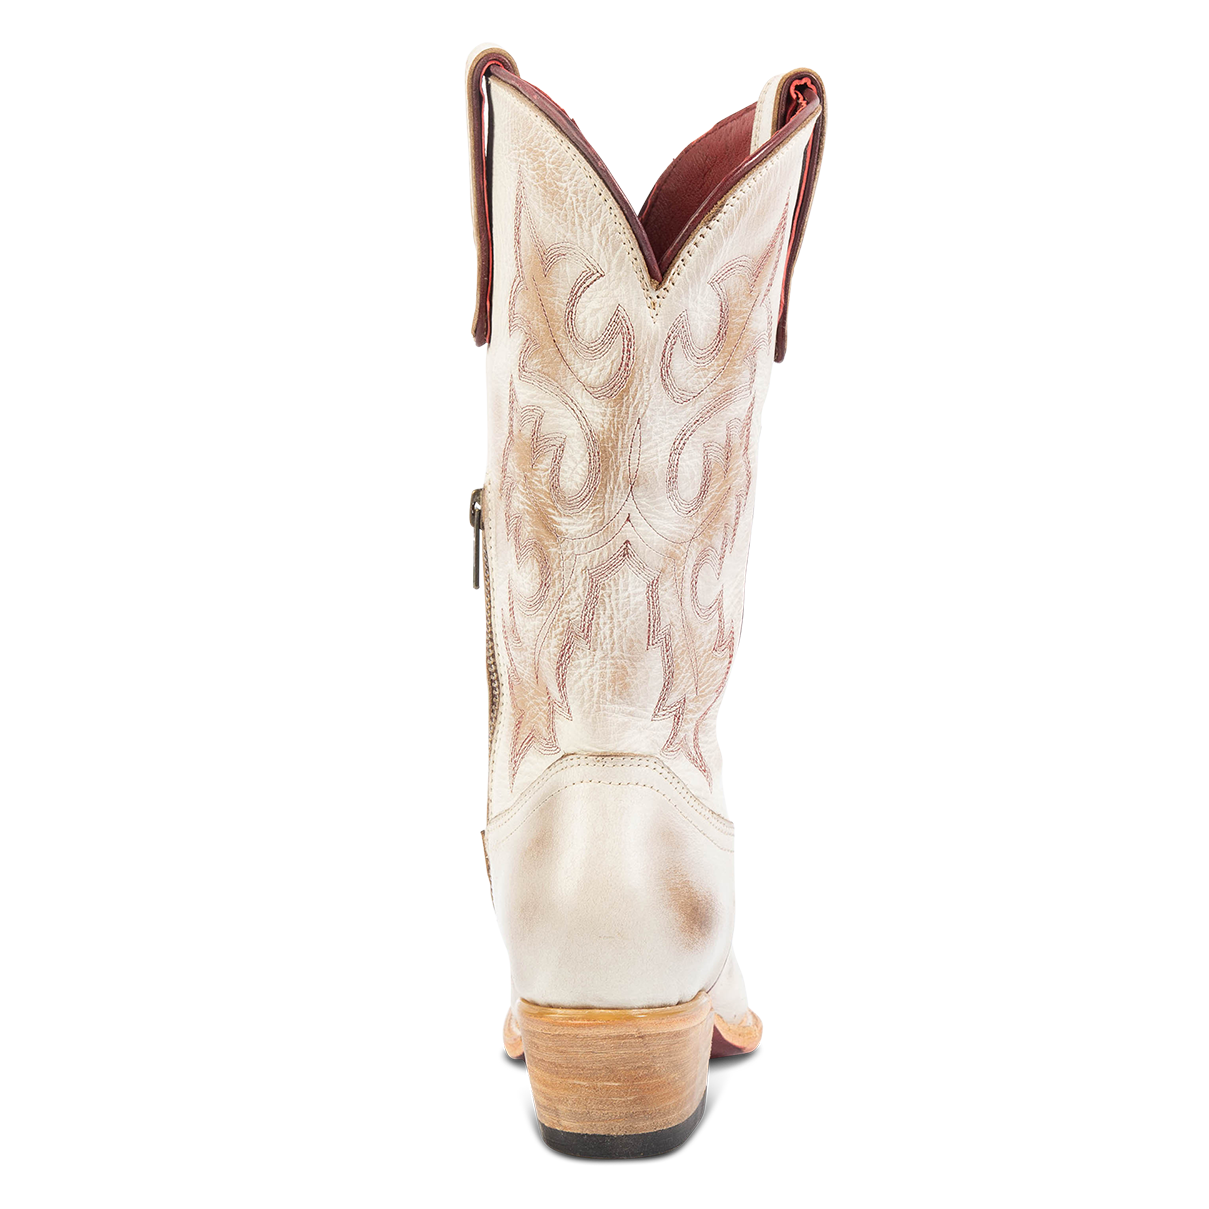 Back view showing intricate stitching and low heel on FREEBIRD women's Wilson beige leather western boot